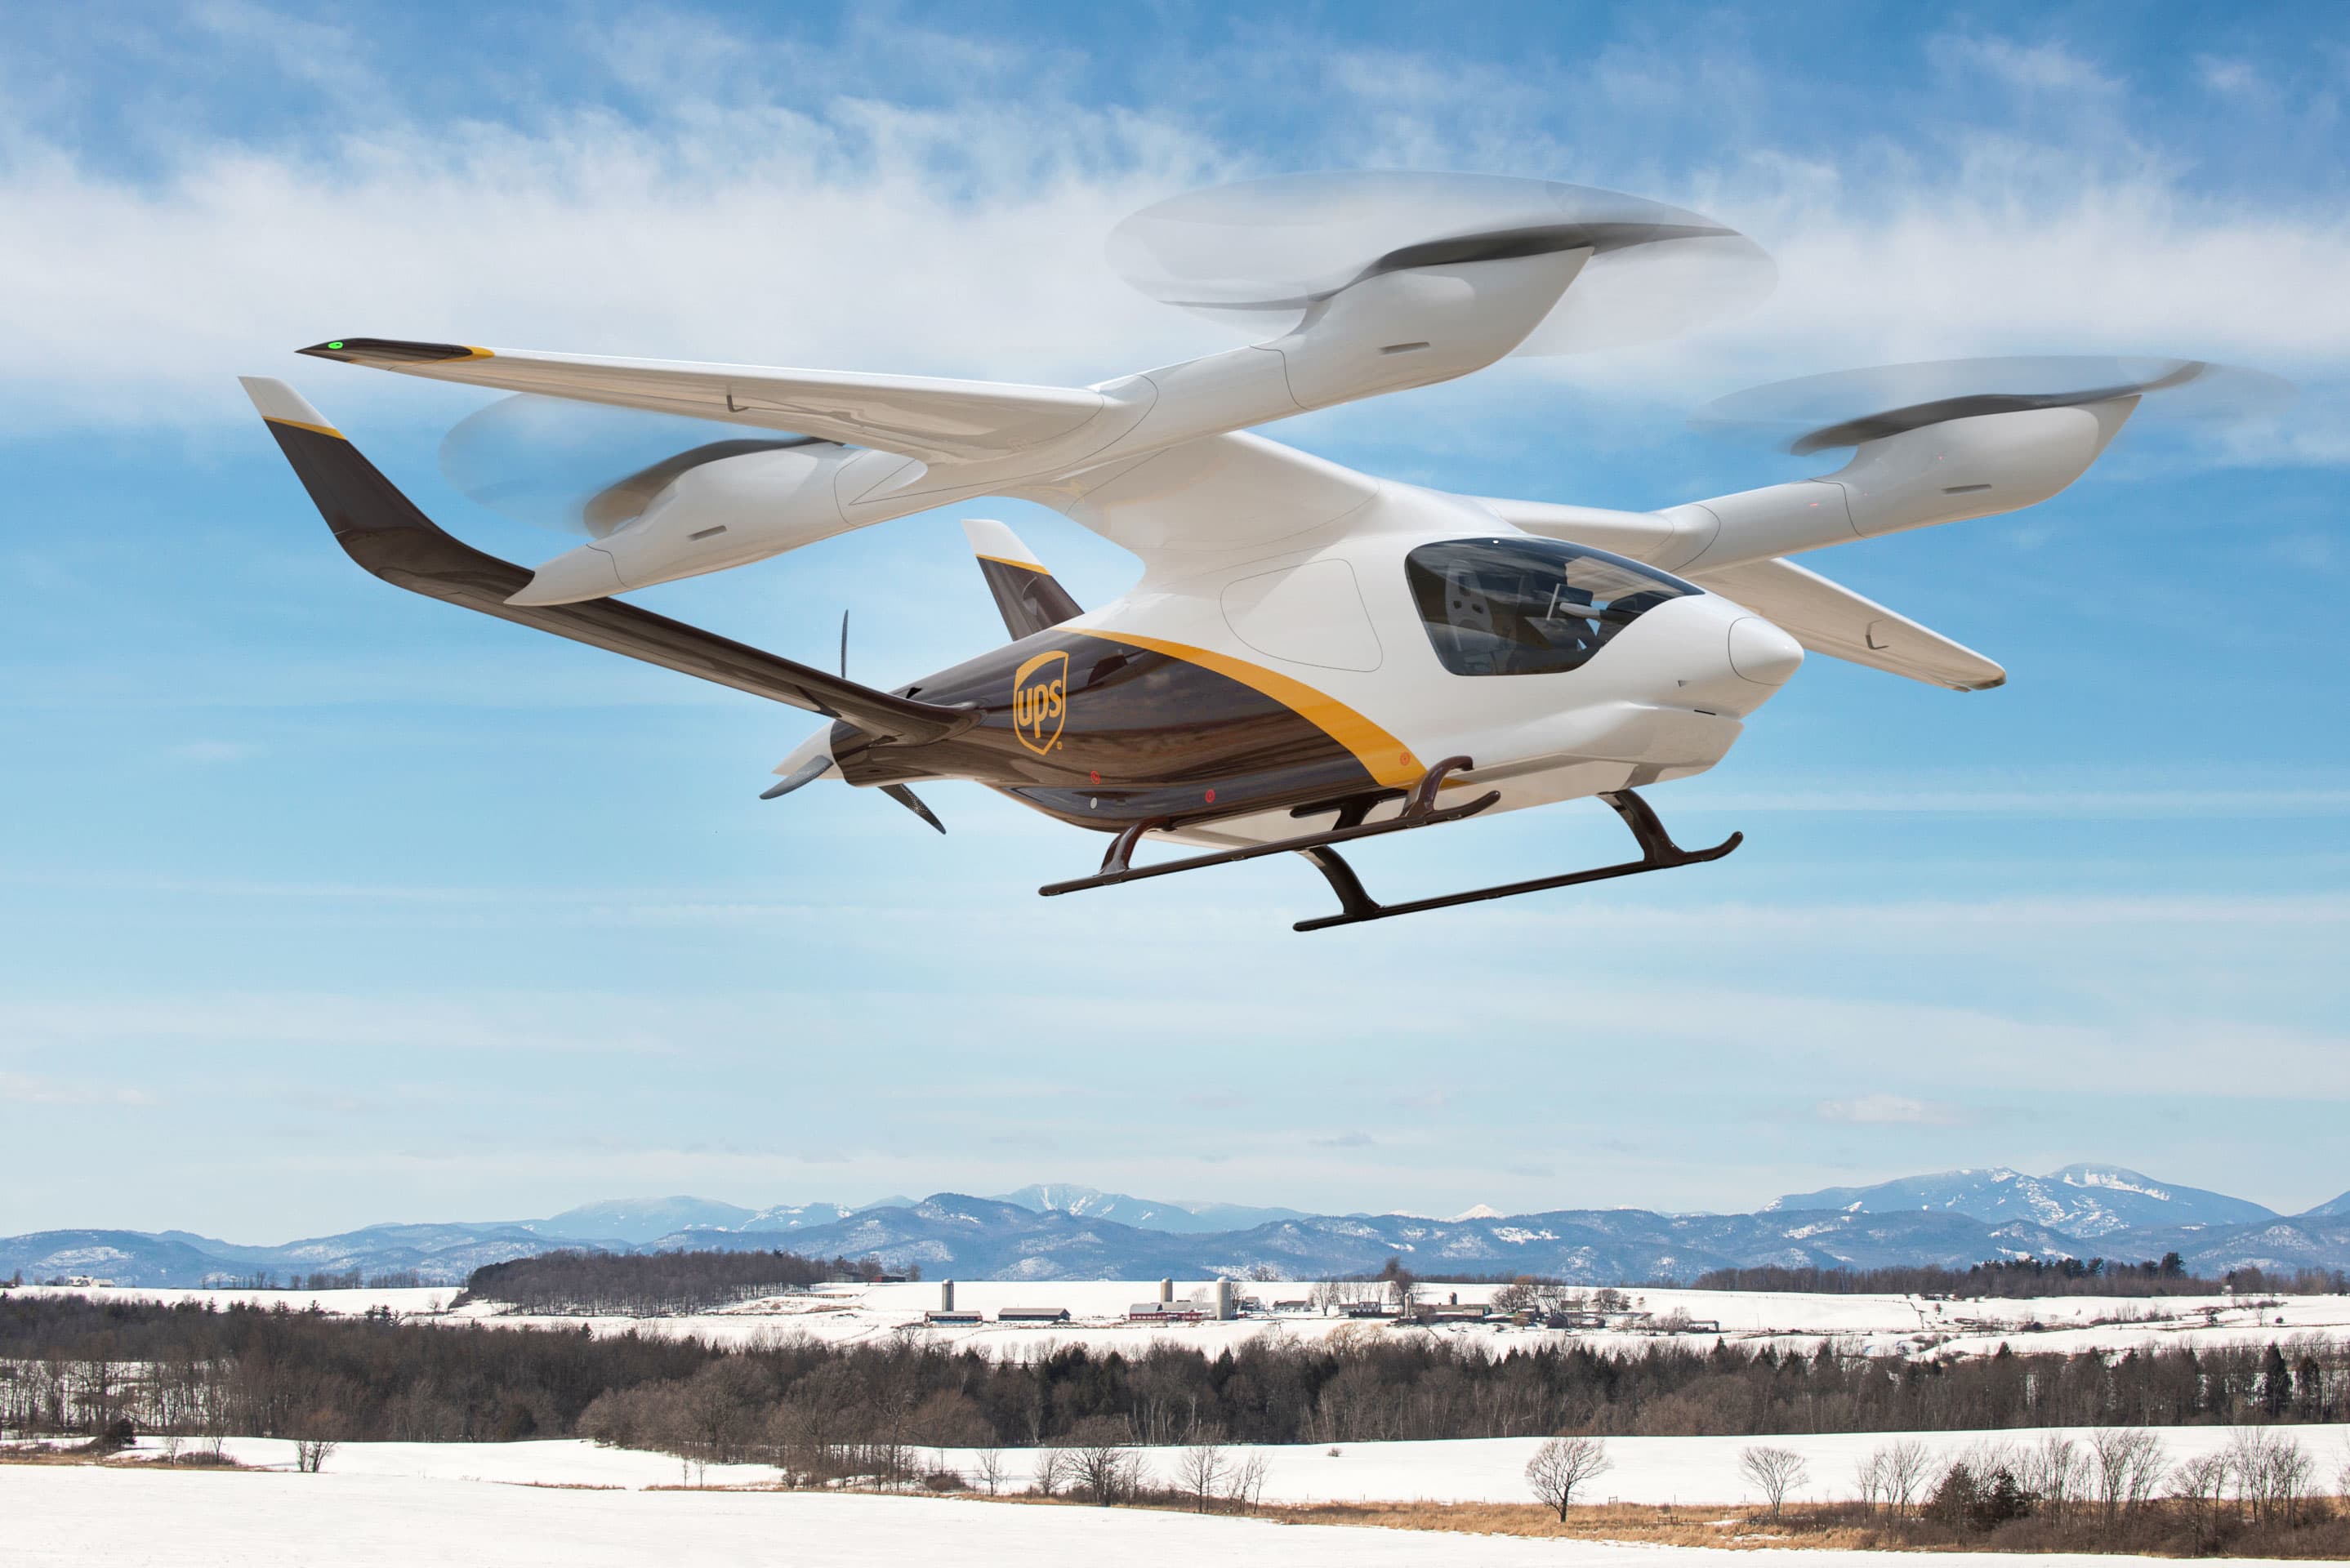 UPS agrees to buy electric vertical aircraft to speed up package delivery in small markets